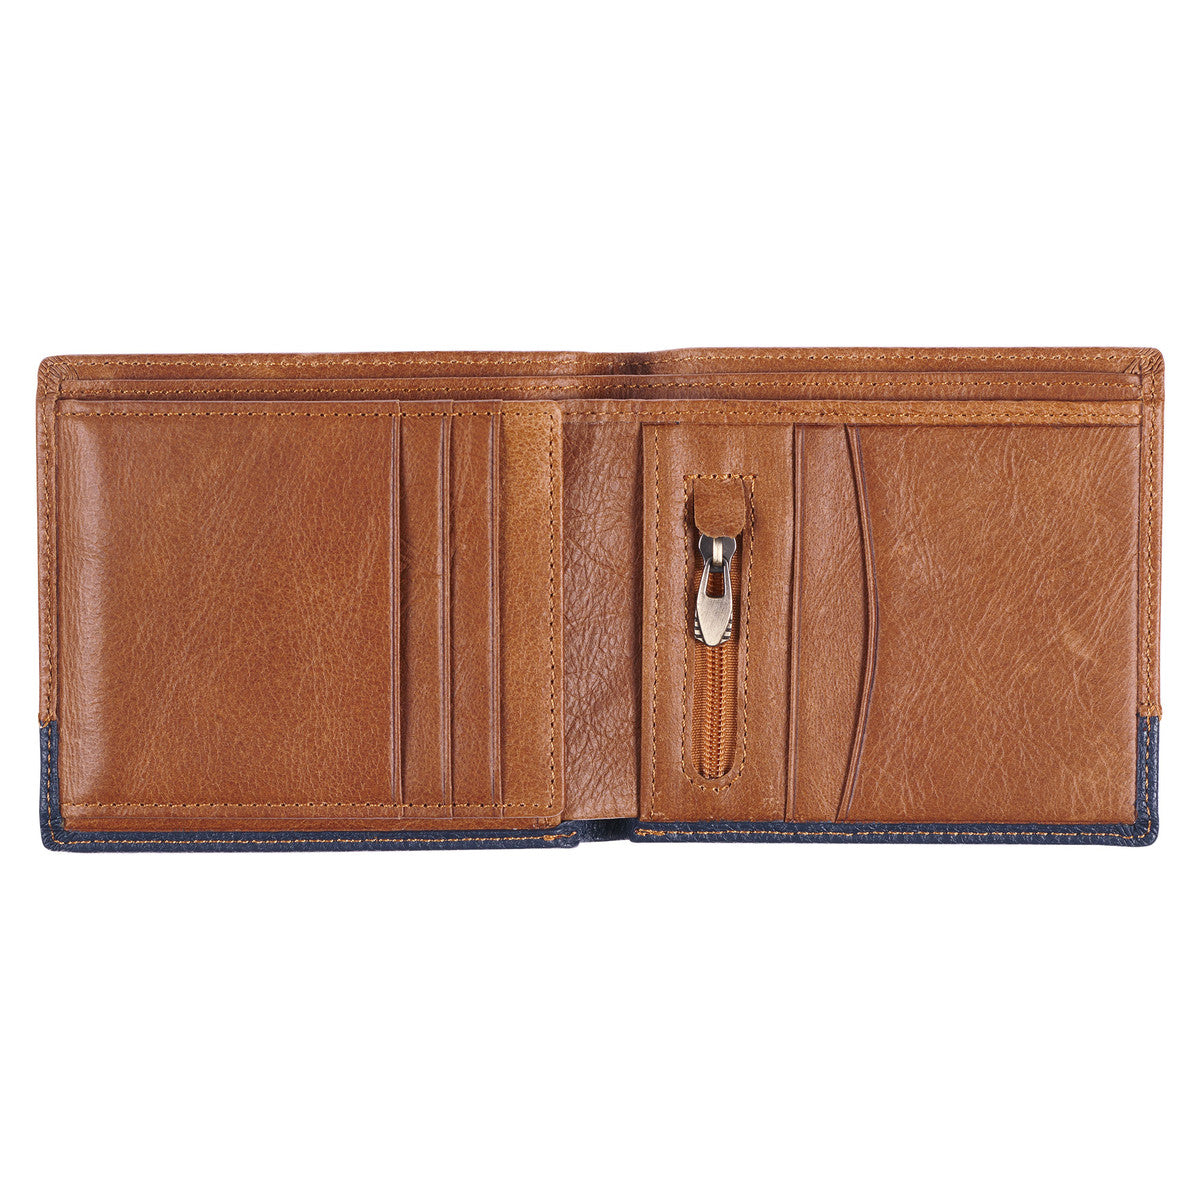 Strong and Courageous Butterscotch and Navy Genuine Leather Wallet - Joshua 1:9